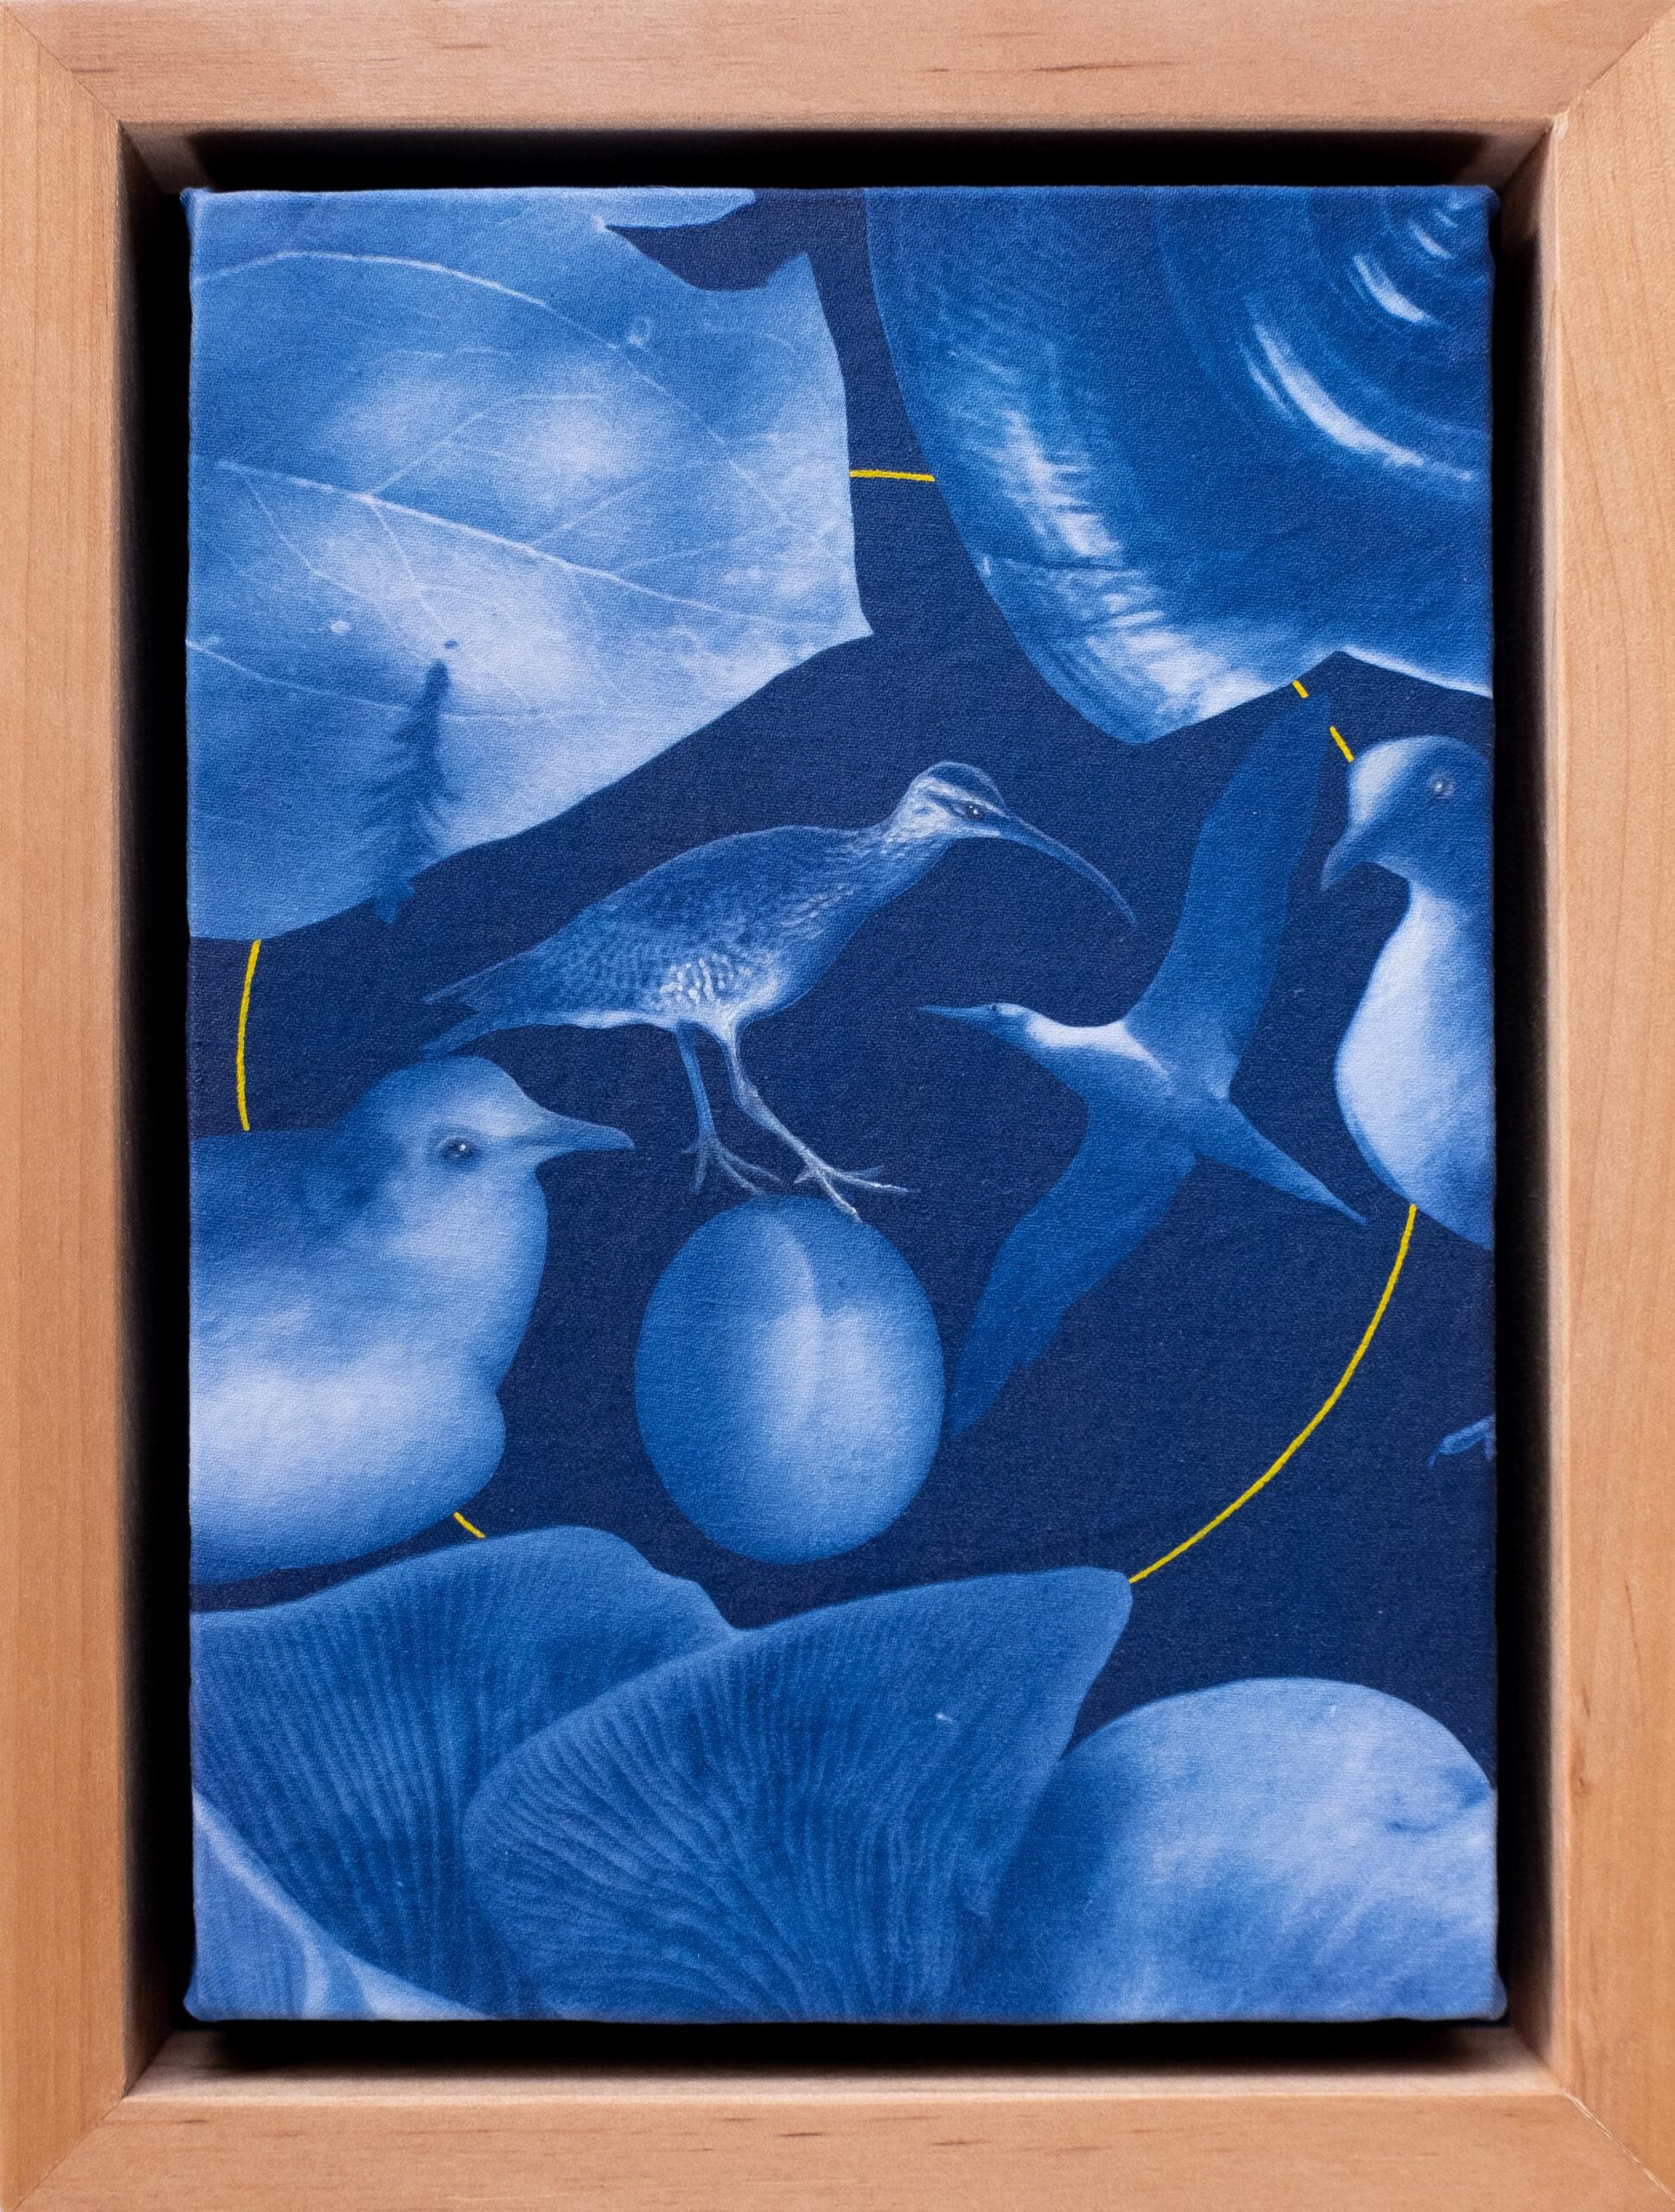 Annalise Neil Abstract Photograph - Watercolor Acrylic and Cyanotype, "The Moon Reflects the Light of the Sun"